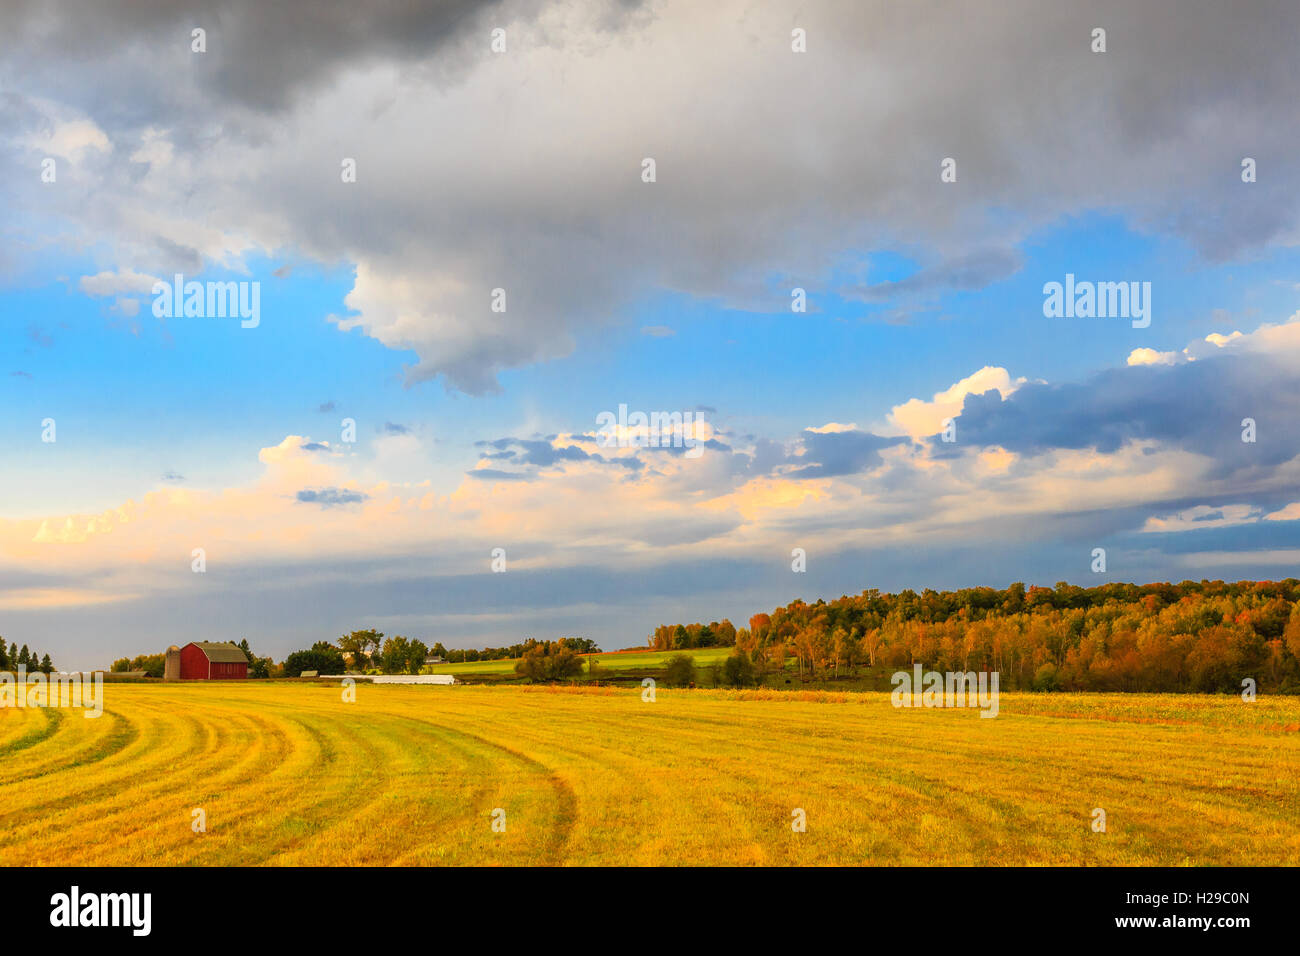 A harvested farmers field in Wisconsin at sunset. Stock Photo